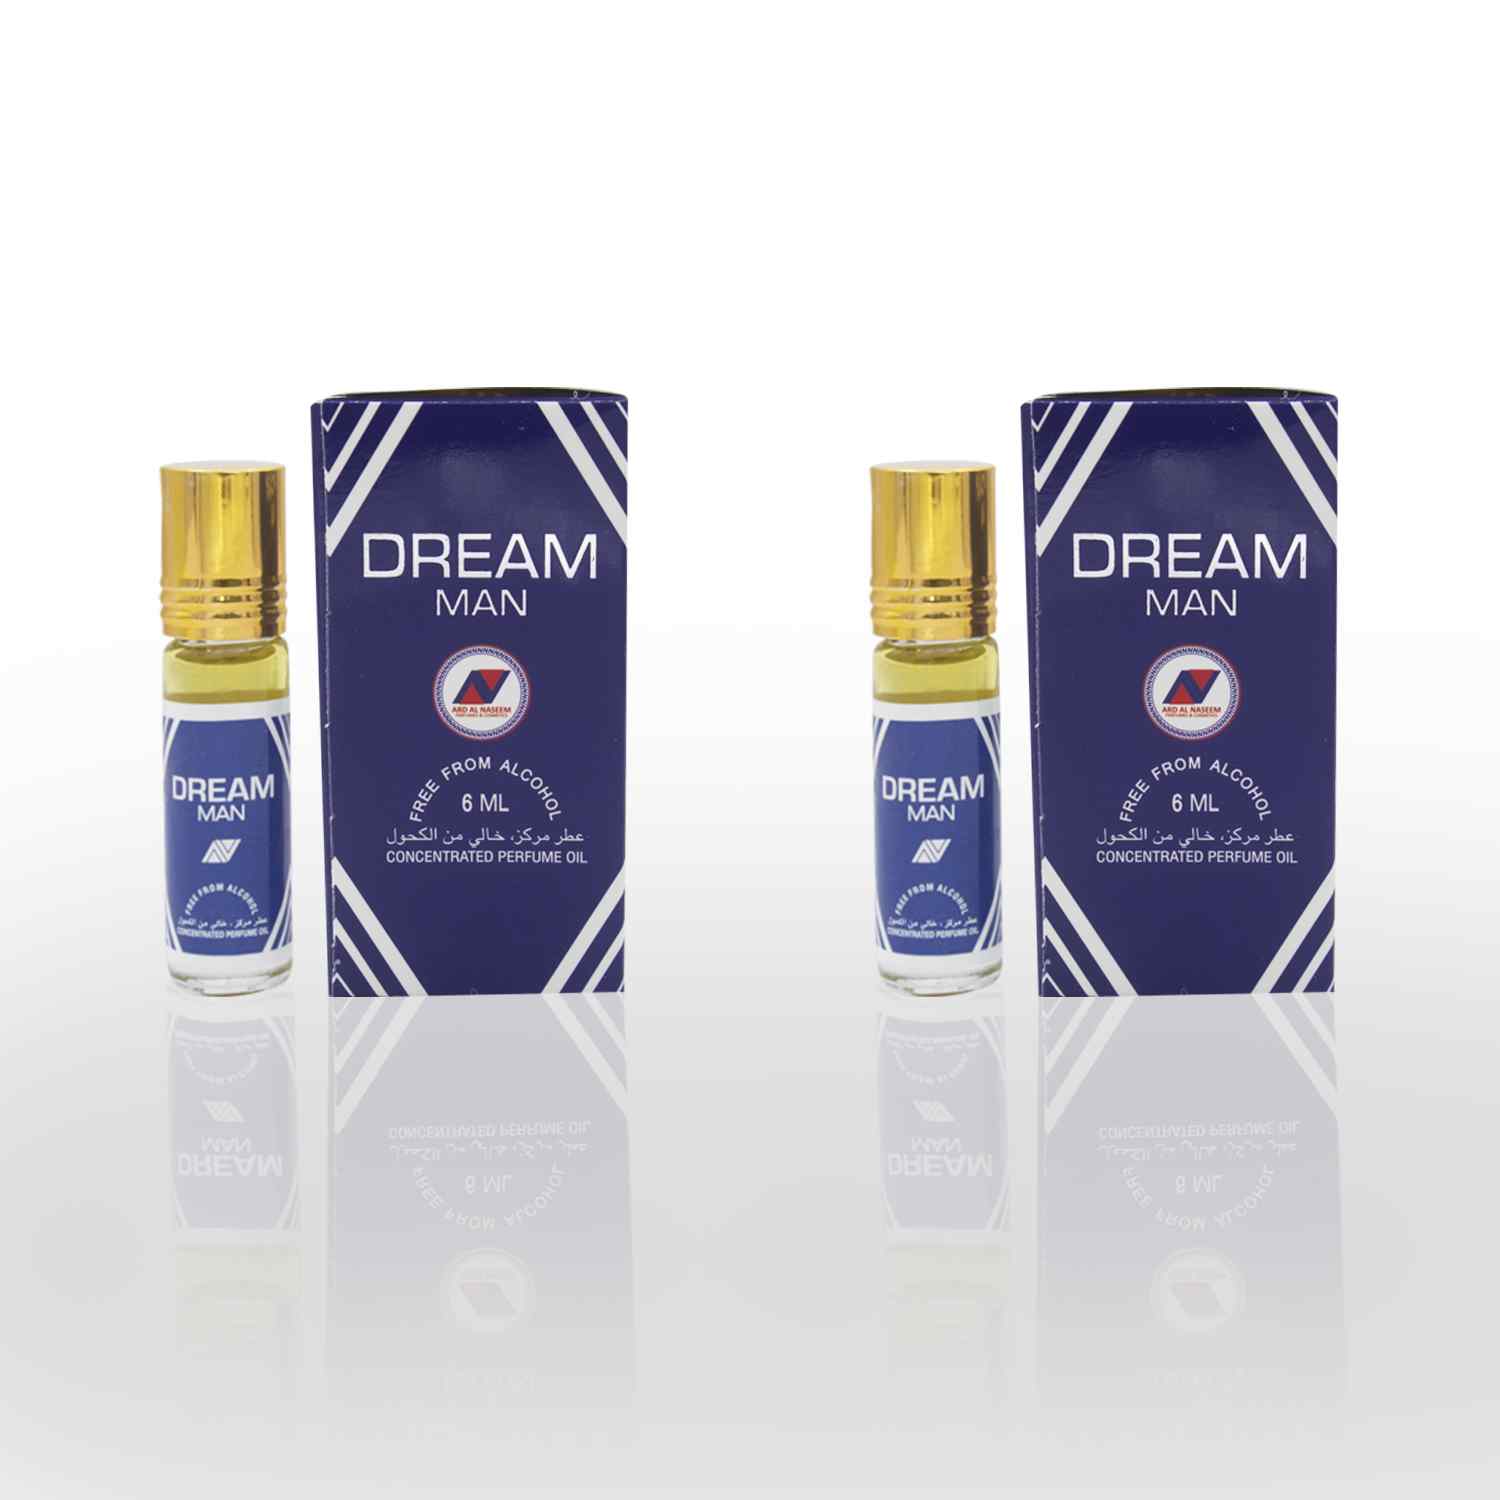 Dream Men concentrated oil attar rollon 6ml by Ard perfumes